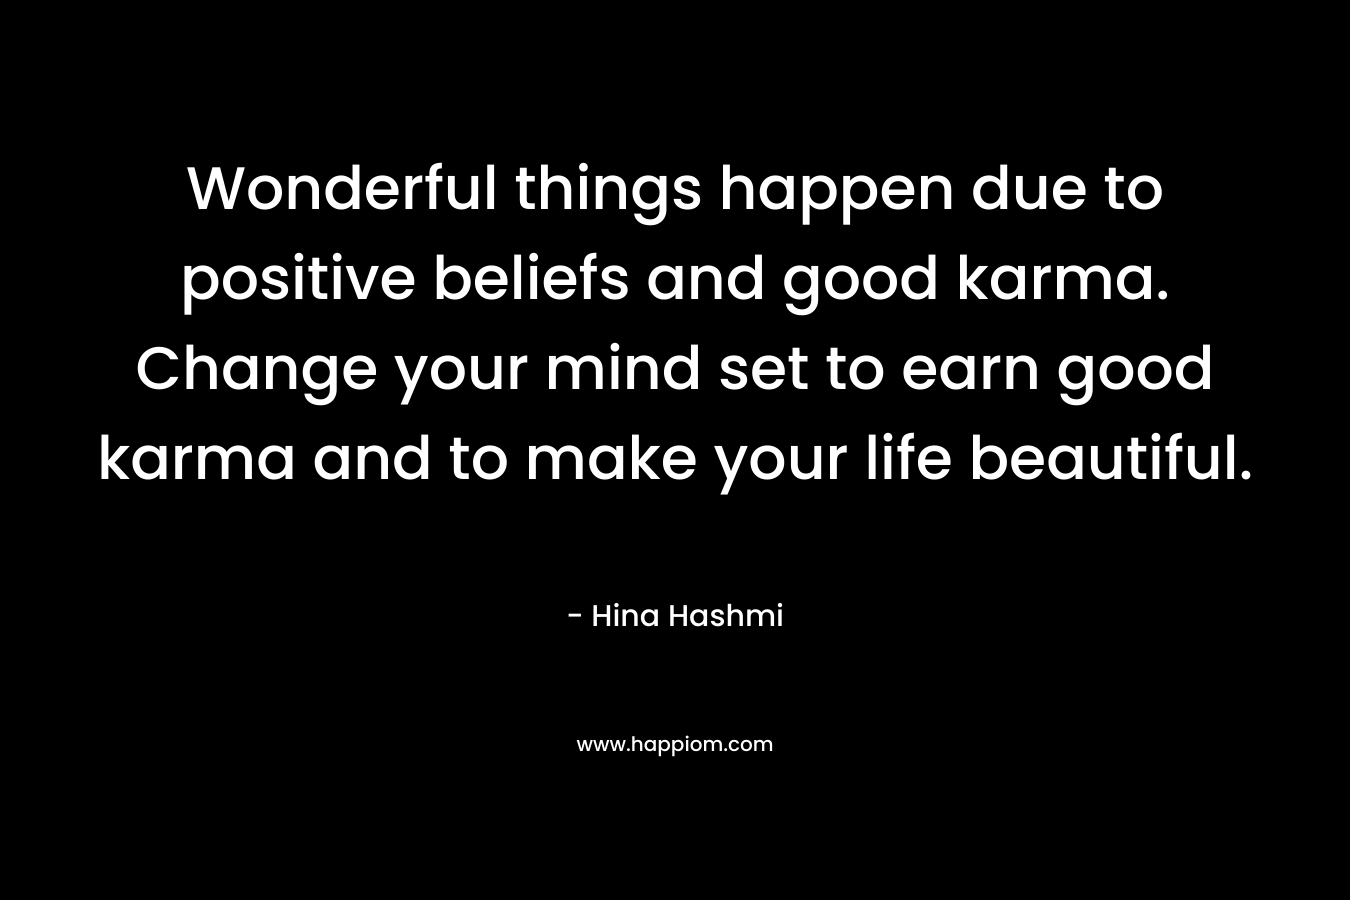 Wonderful things happen due to positive beliefs and good karma. Change your mind set to earn good karma and to make your life beautiful.